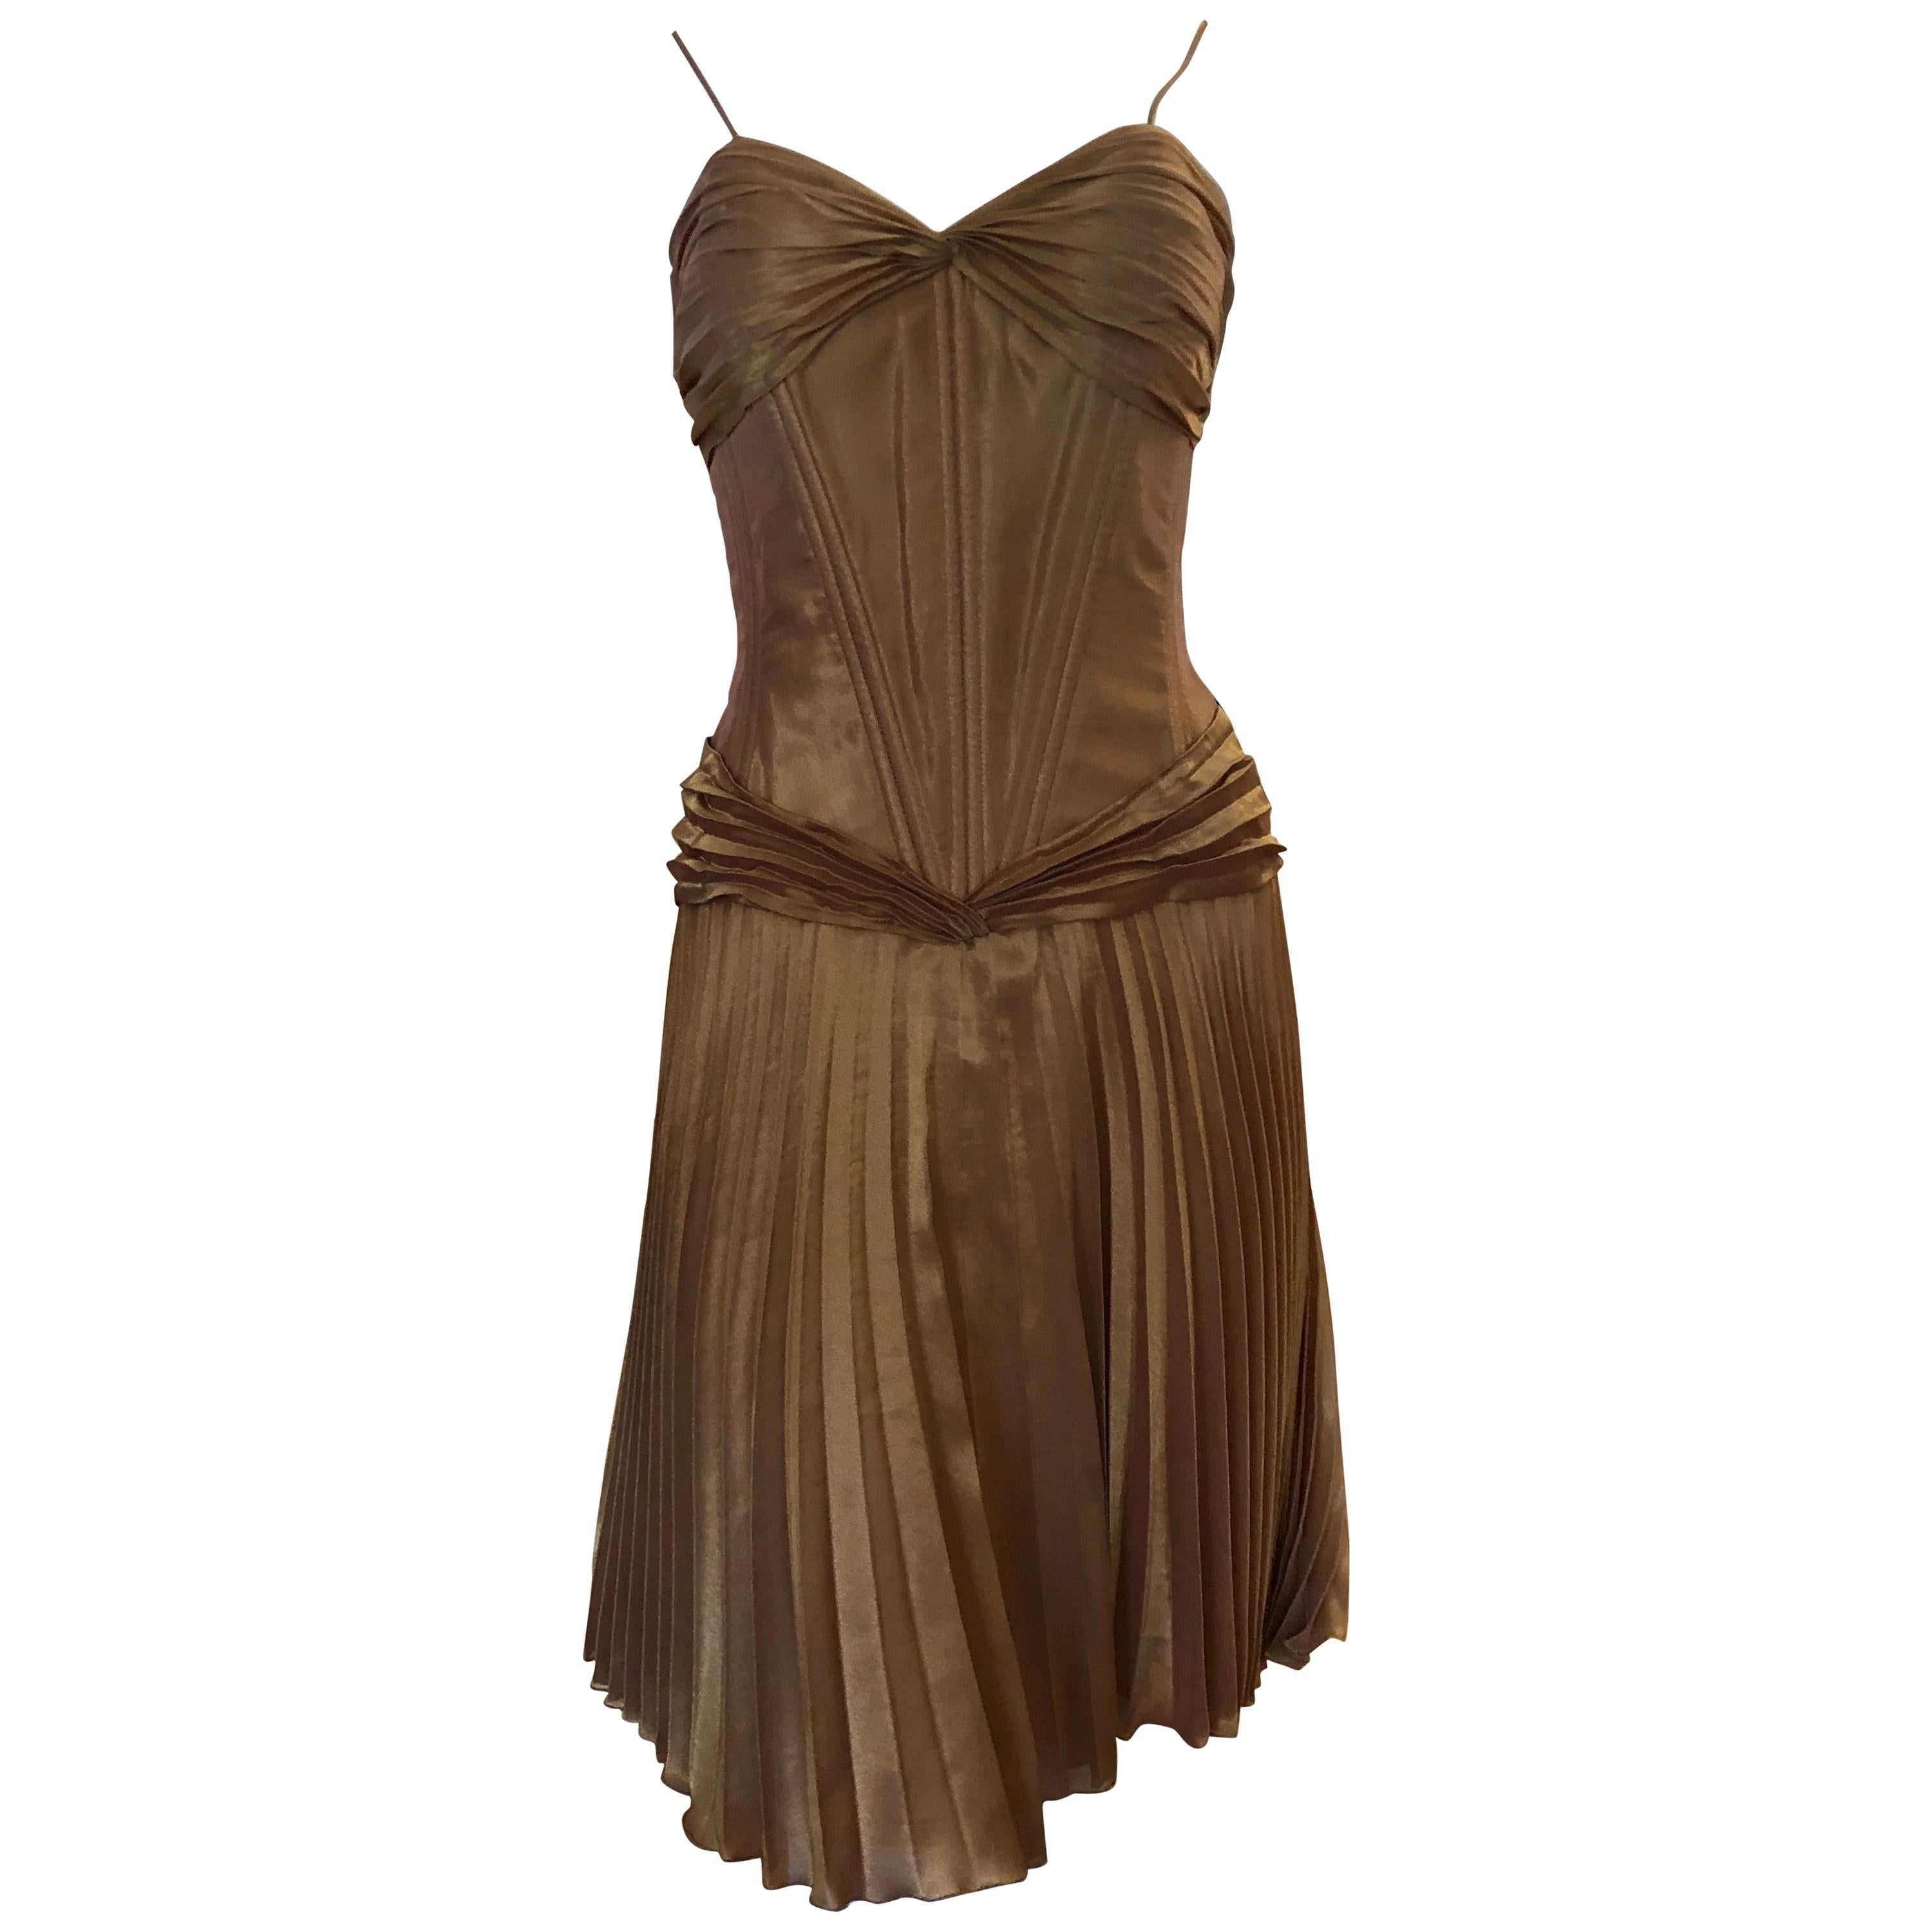 1980 Vicky Tiel "Sara" Couture Metallic Gold Lame Dress with Bolero (38) As New